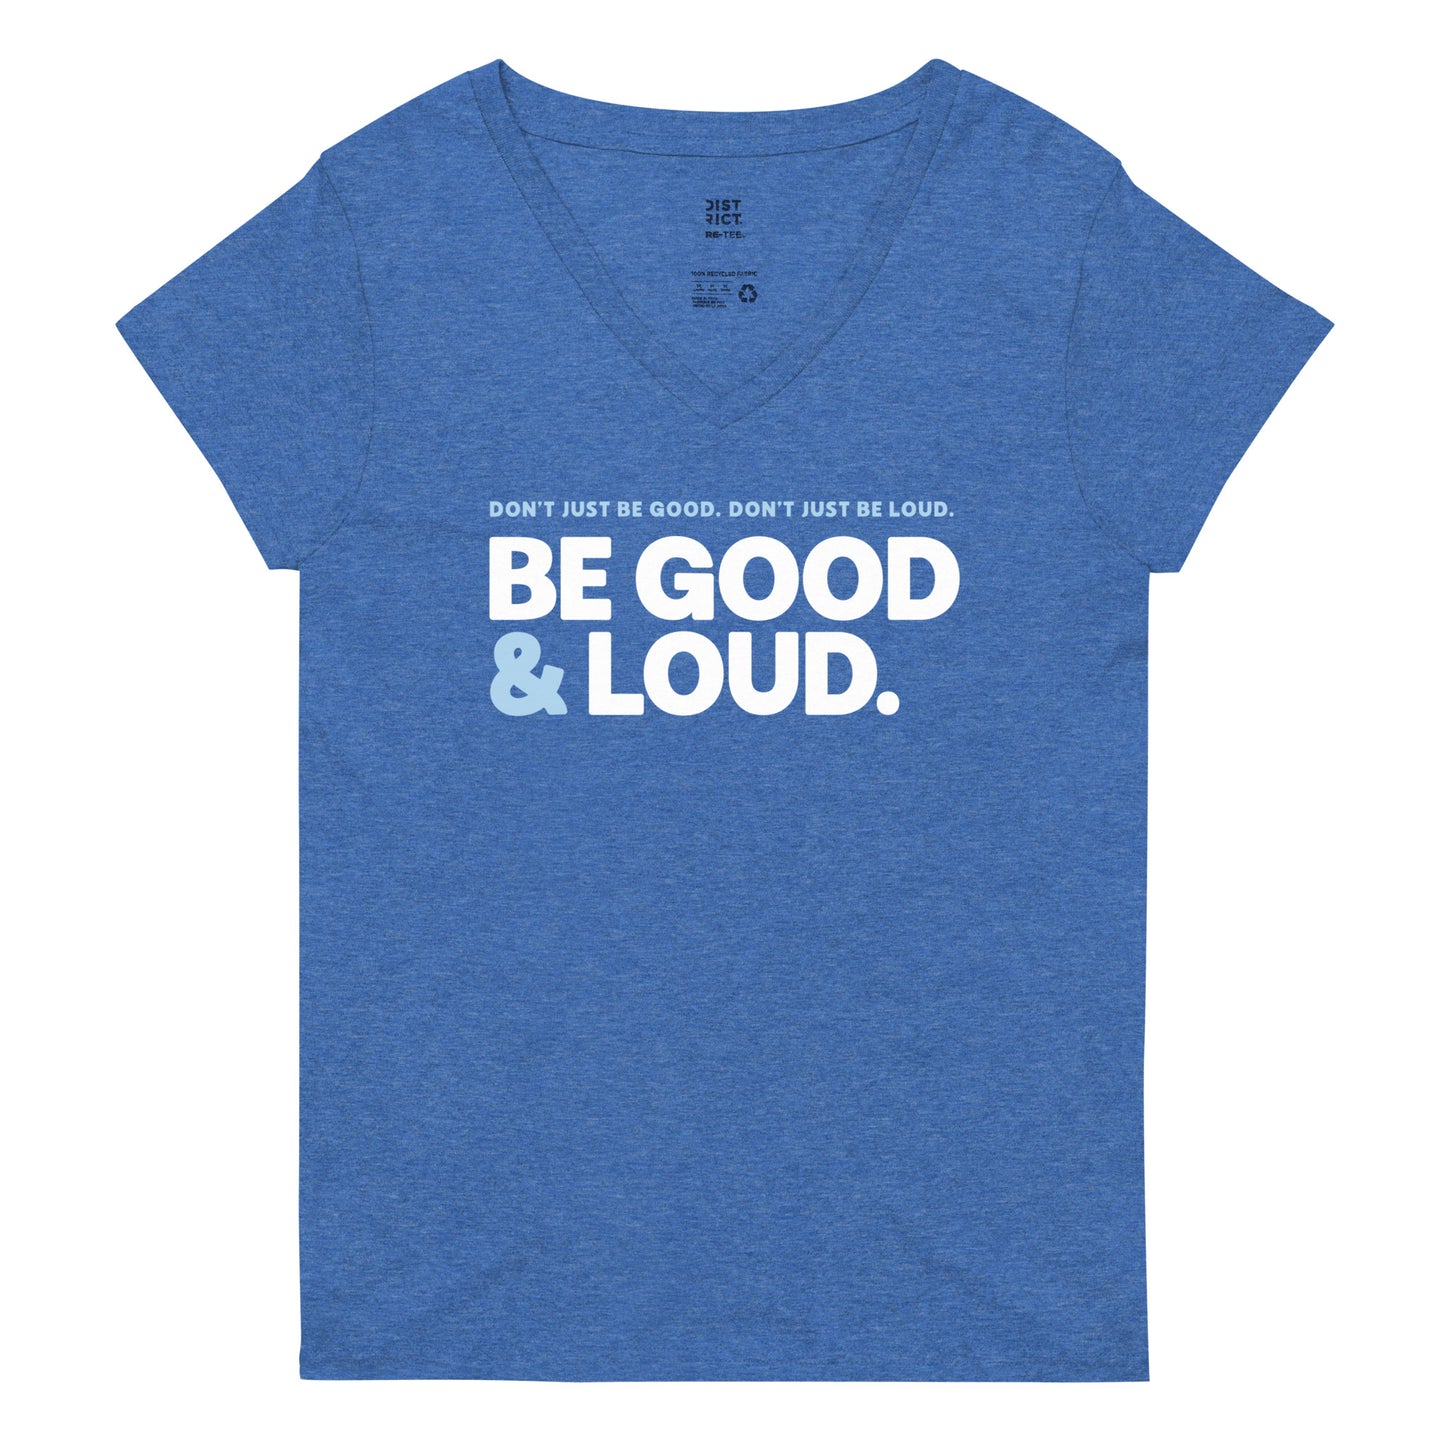 Be Good and Loud - Women’s V-Neck Tee